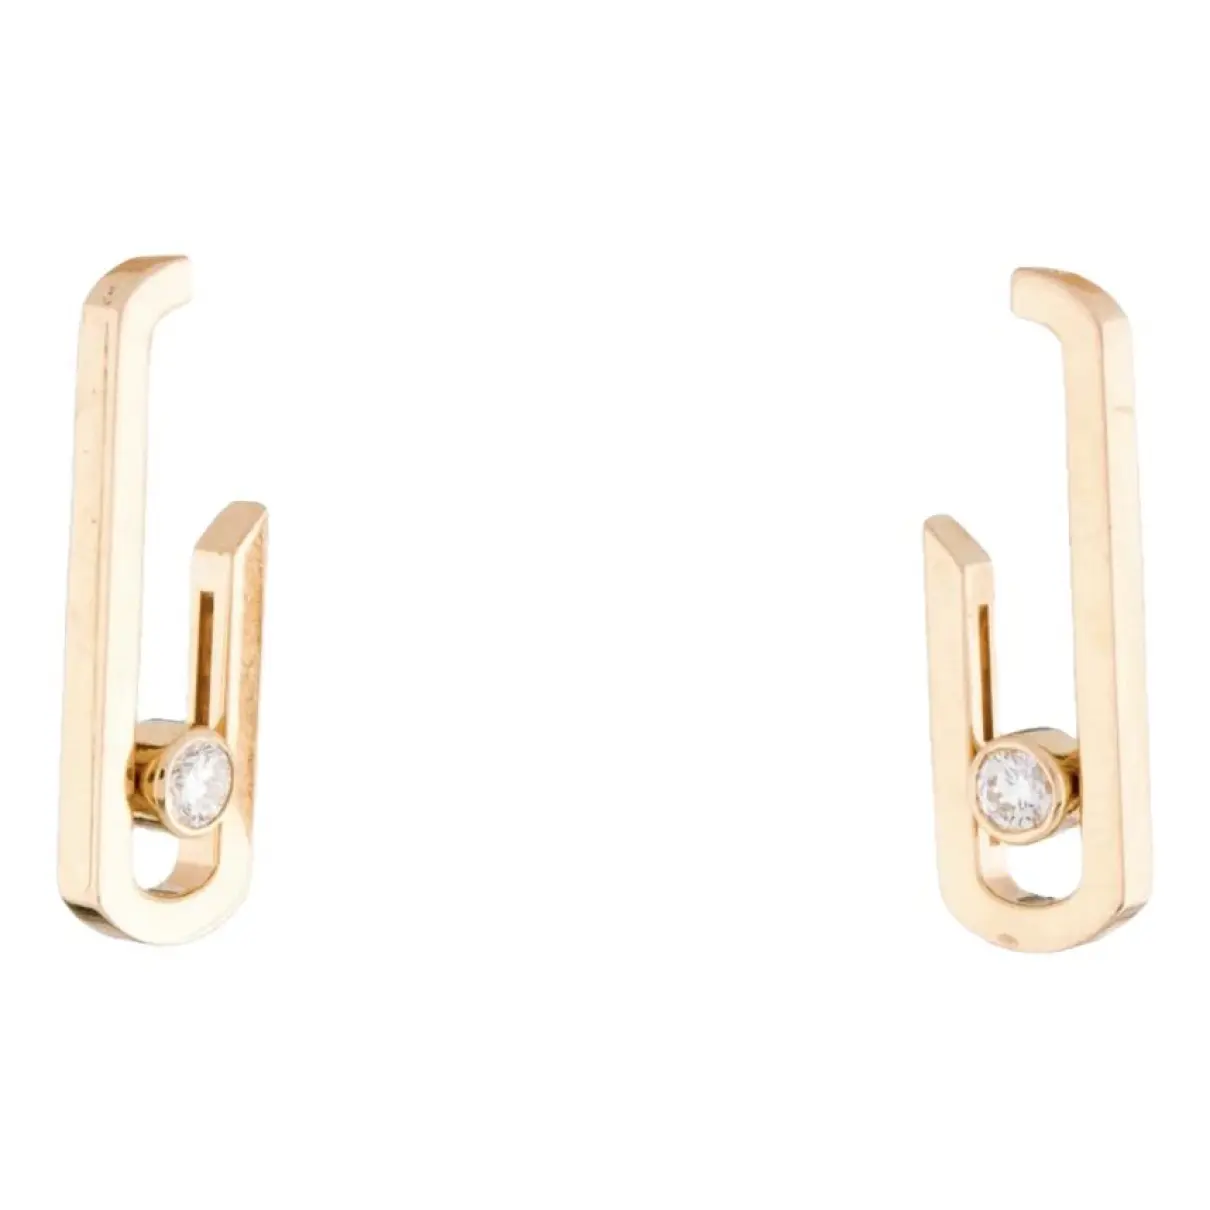 Move Addiction pink gold earrings